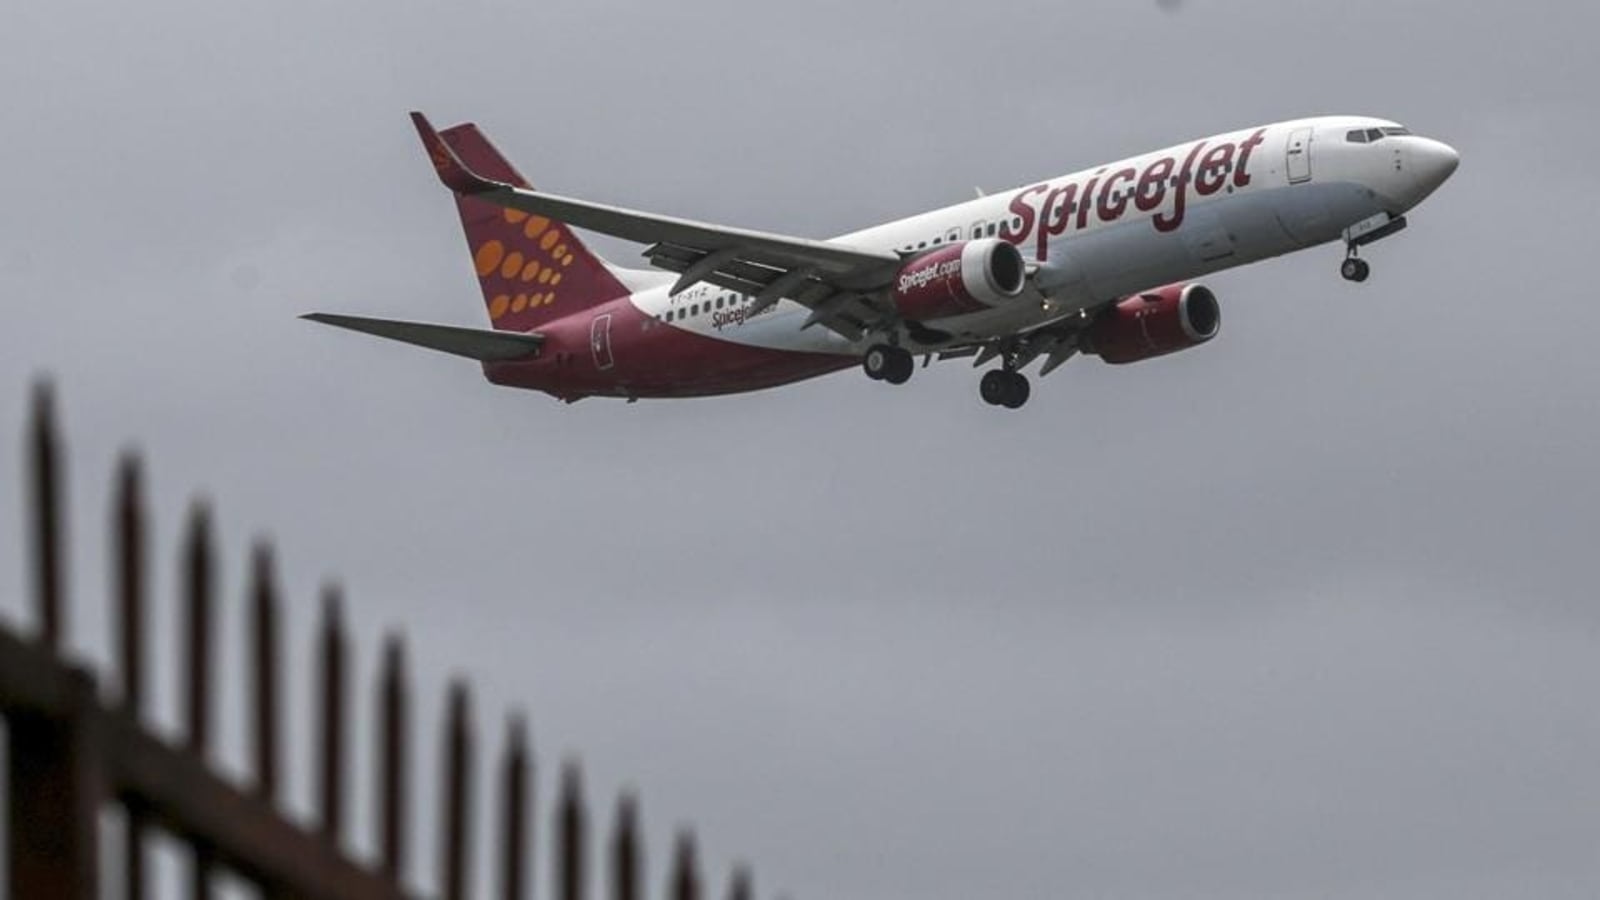 spicejet-plane-lands-safely-at-hyderabad-airport-after-smoke-detected-in-cabin